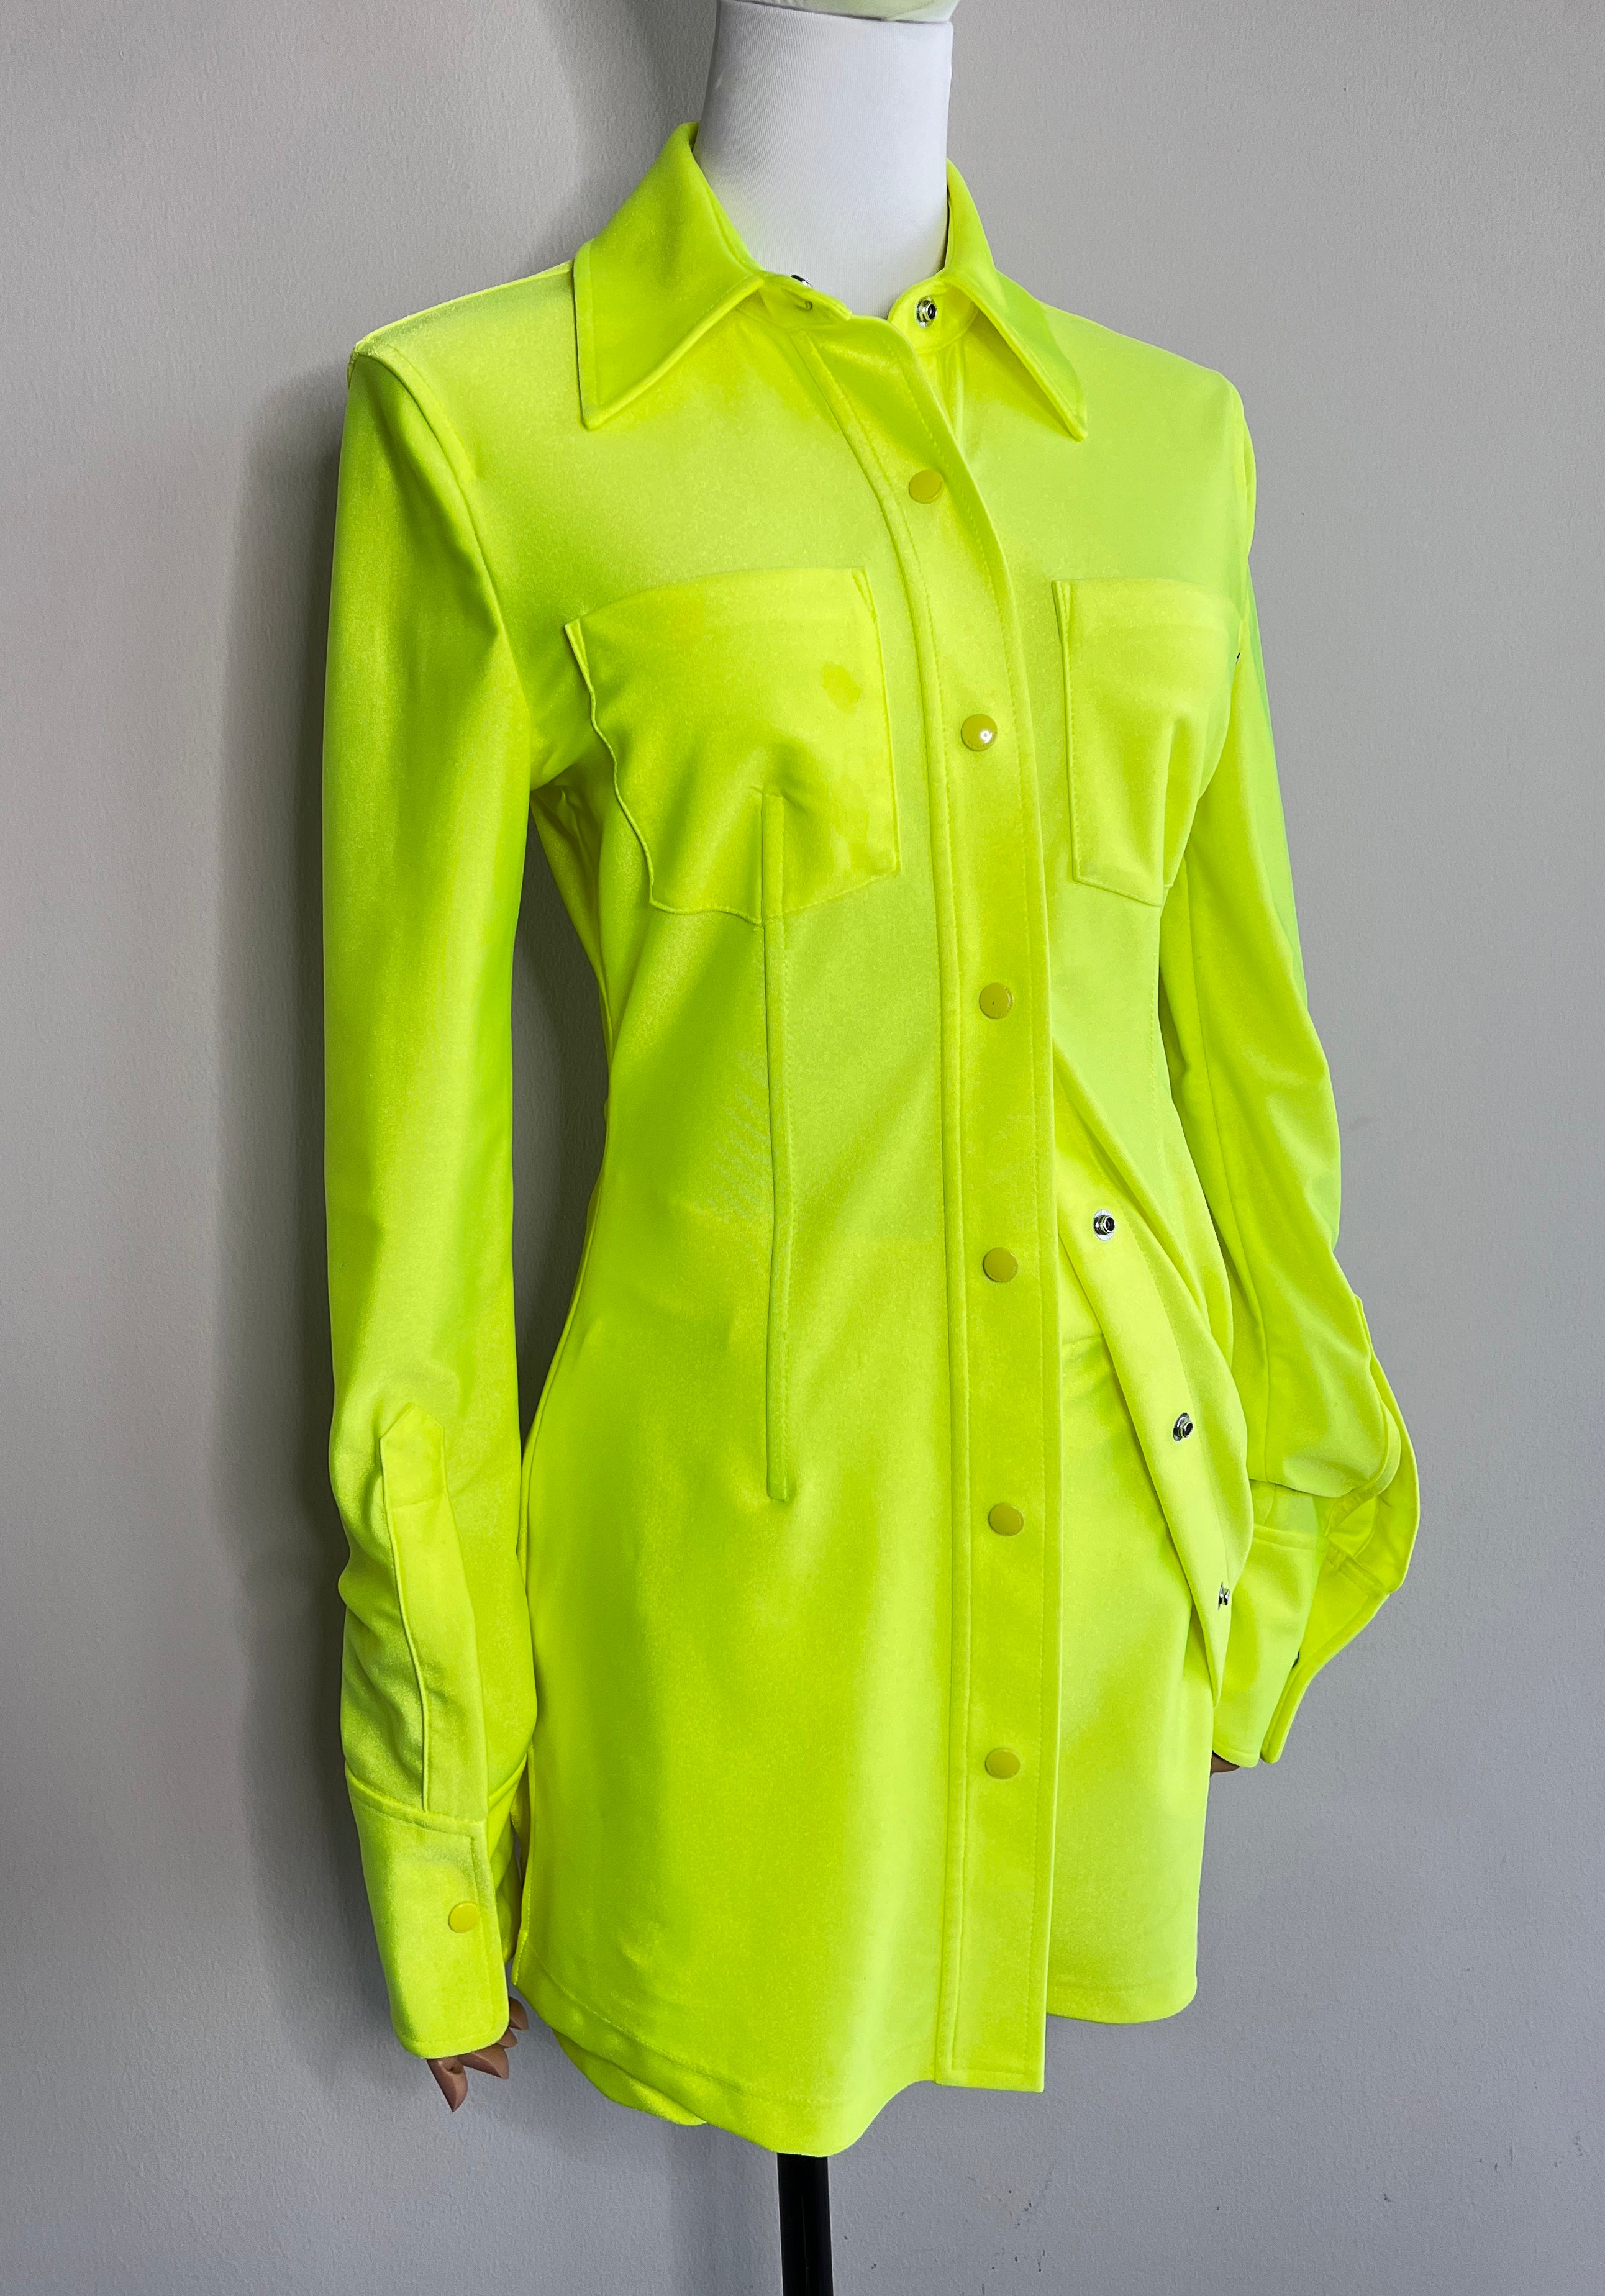 A set of Yellow Neon Stretch-jersey Shirt and shorts - ALEXANDER WANG